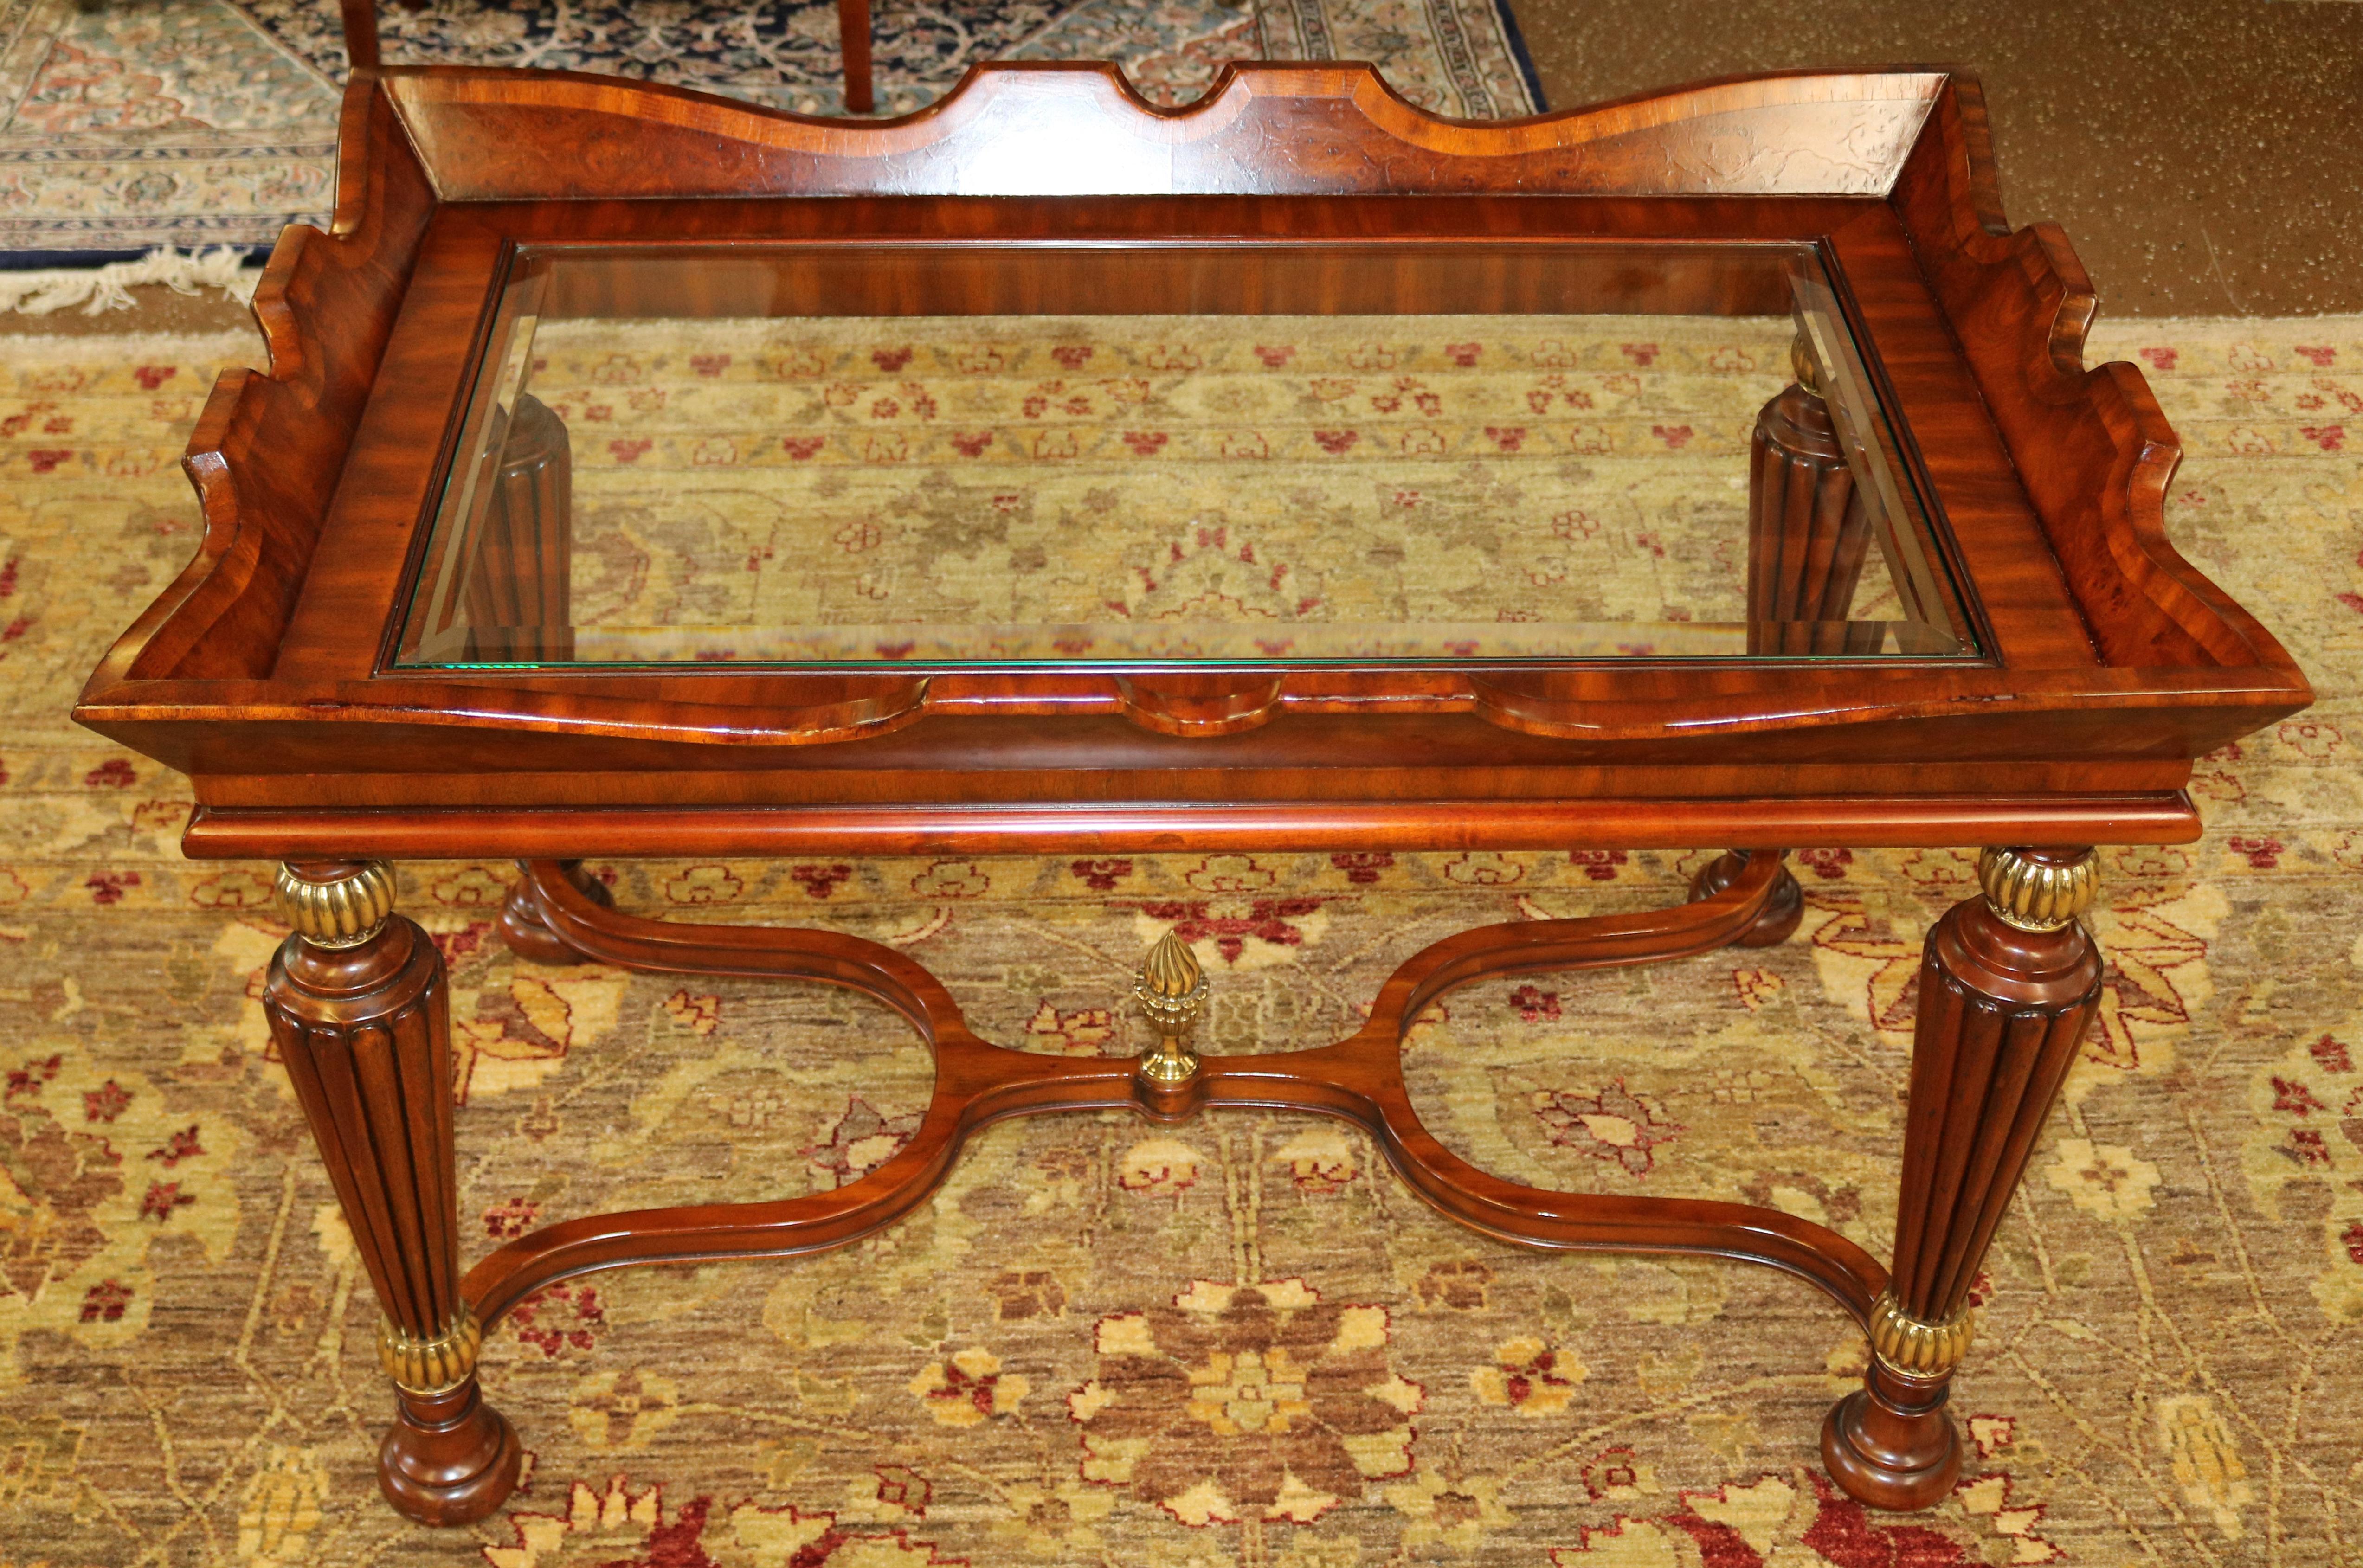 ​Beautiful Burled Wood & Mahogany Beveled Glass Cocktail Coffee Table By Maitland Smith

Measures 25 H x 39 W x 25 D

Nice mahogany grain and nice beveled glass top!